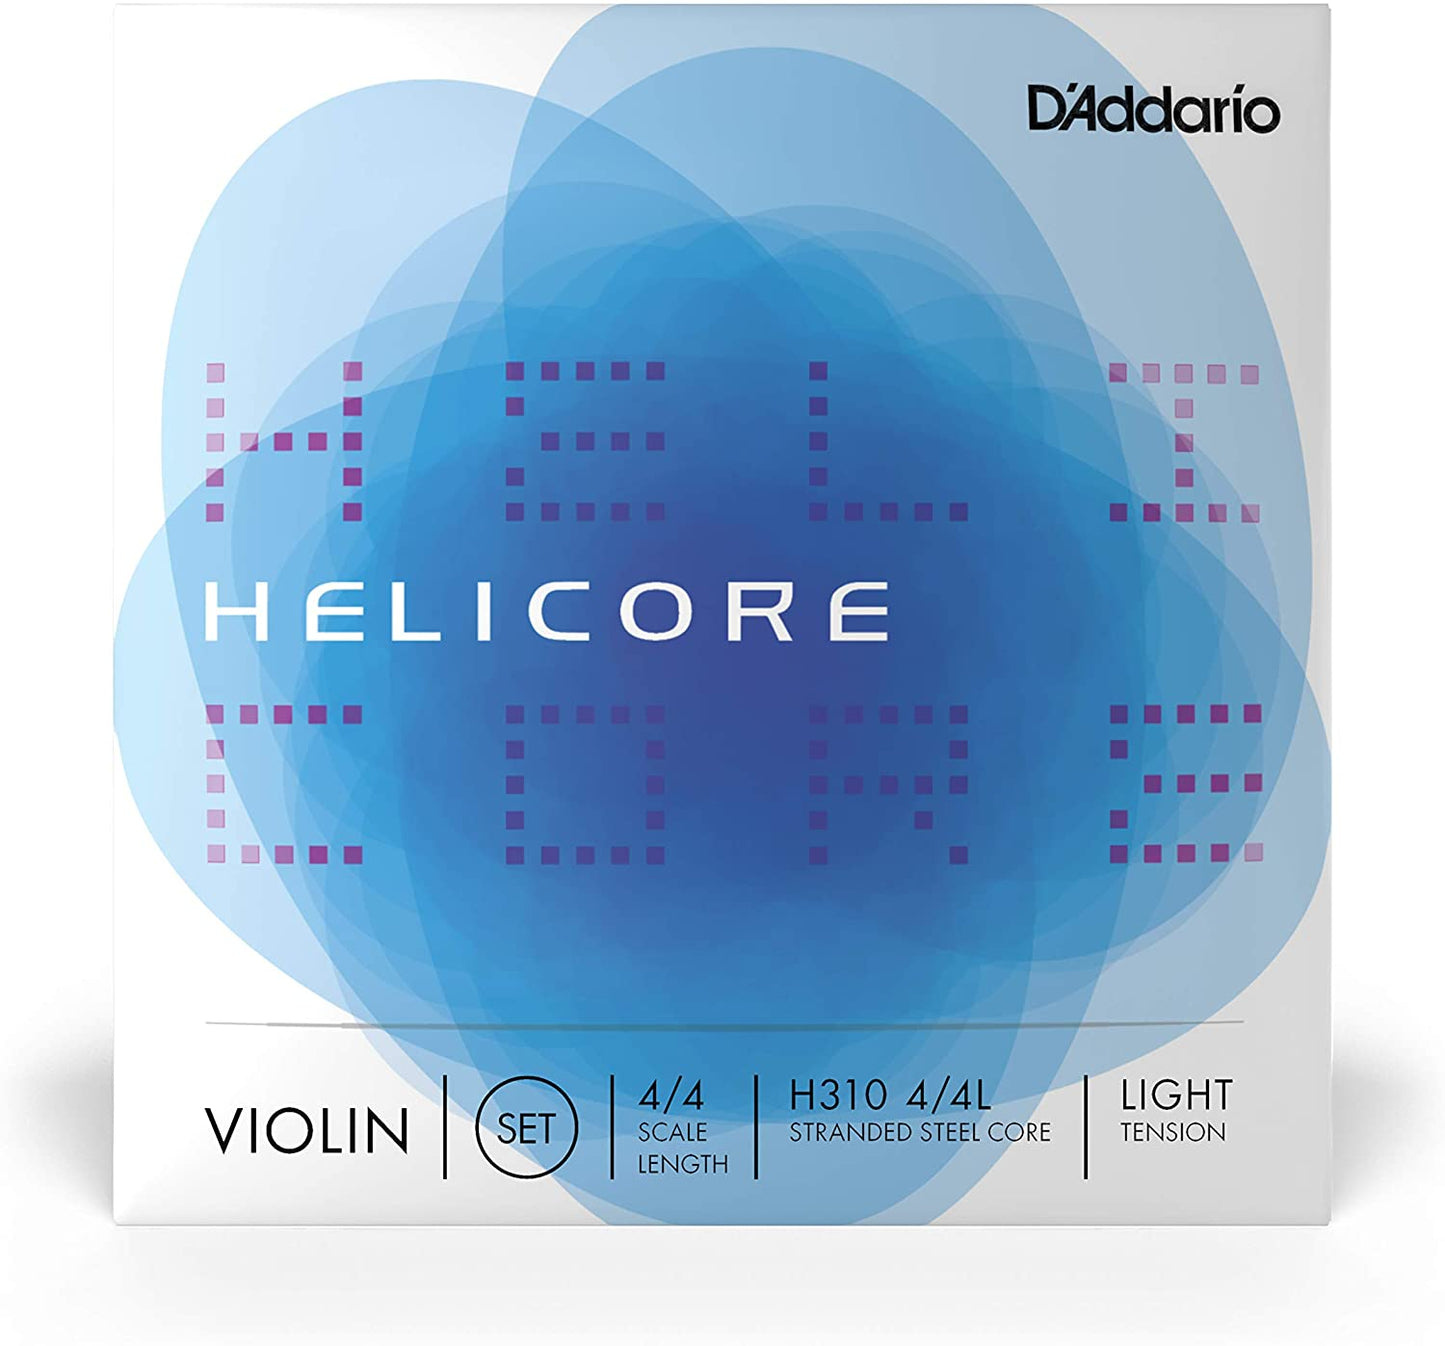 D'Addario Helicore 4/4 Scale Light Tension with Steel E String Violin String Set (H310 4/4L) for Professional and Students Musicians, Intermediate Players